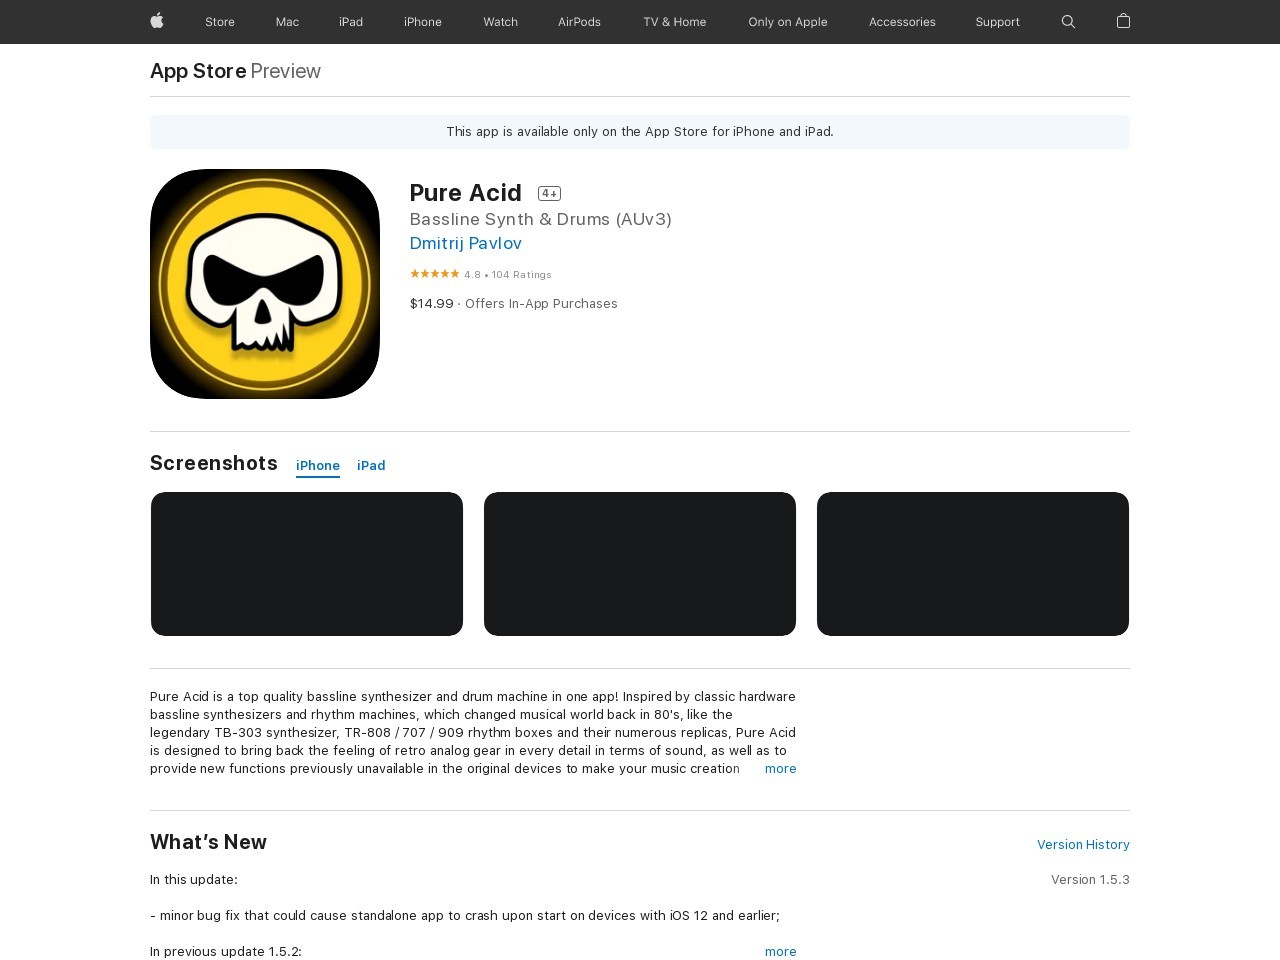 Pure Acid on the App Store